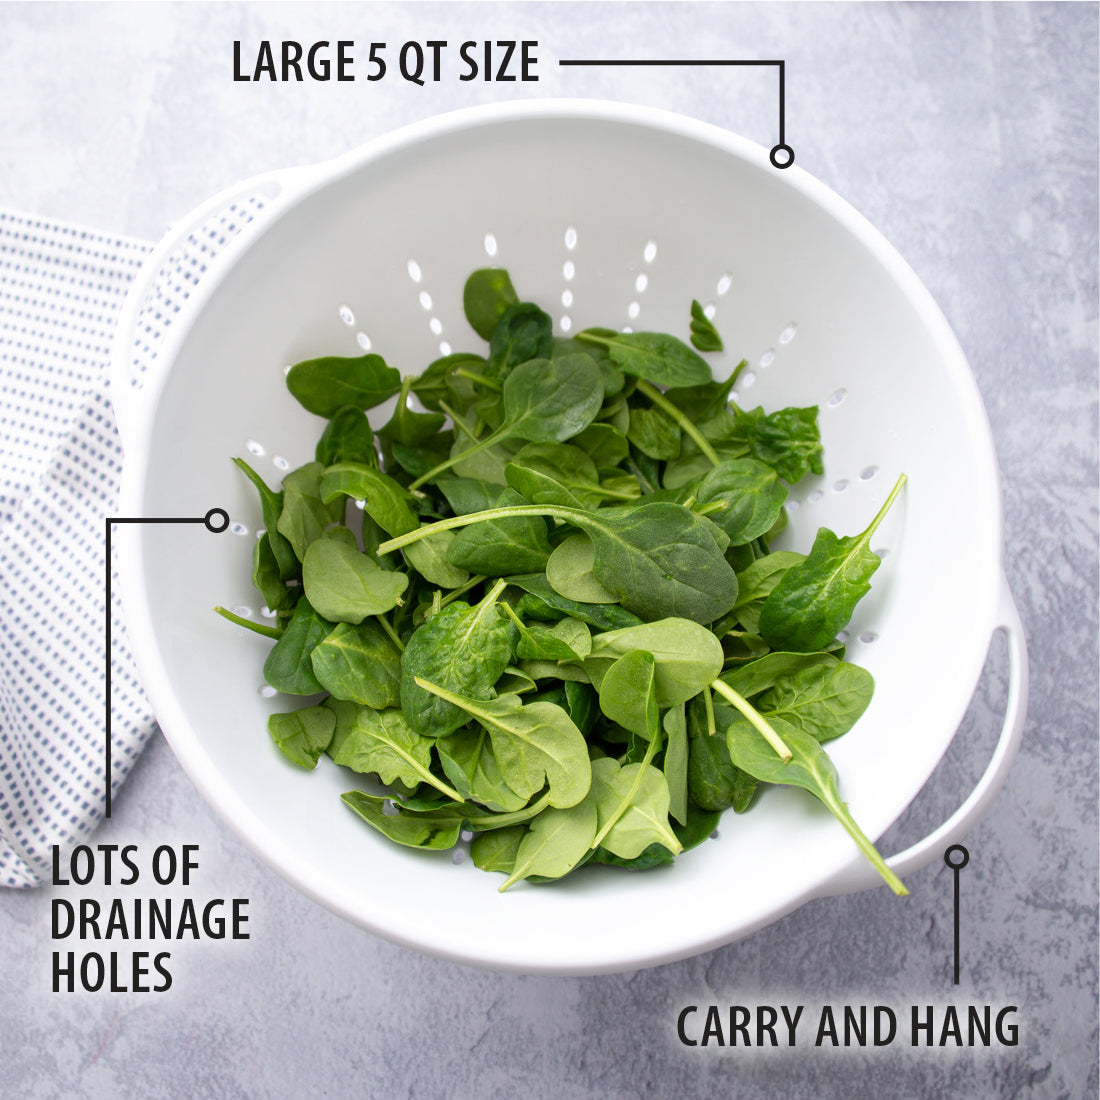 A Large 5 Qt. Colander full of fresh spinach